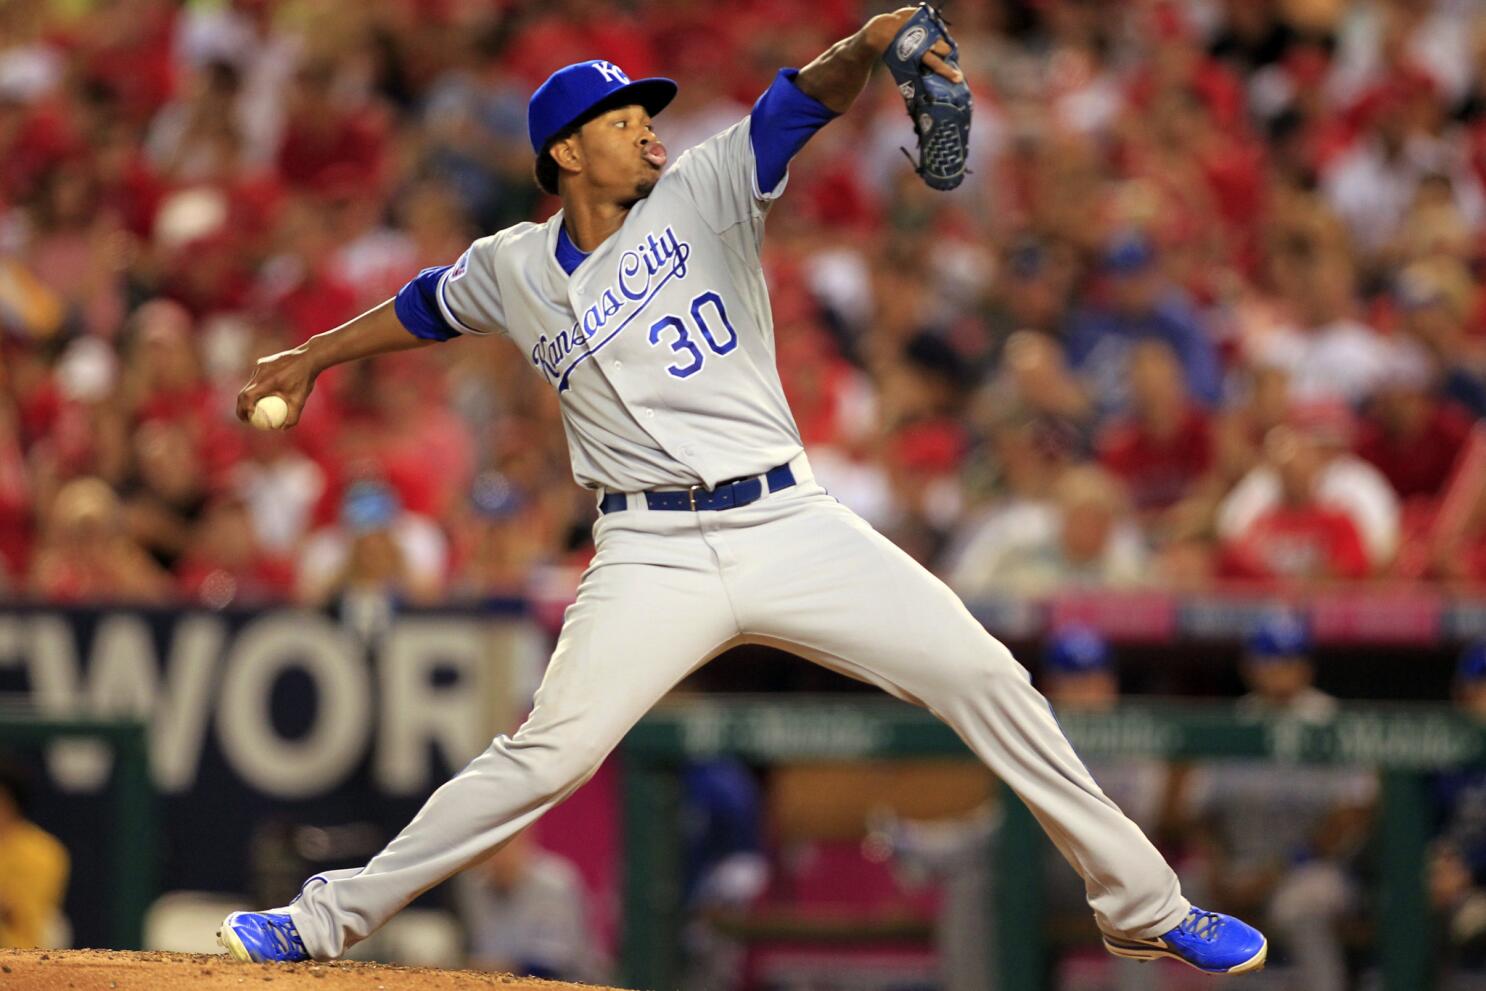 Andy Marte and Yordano Ventura killed in car accidents - Covering